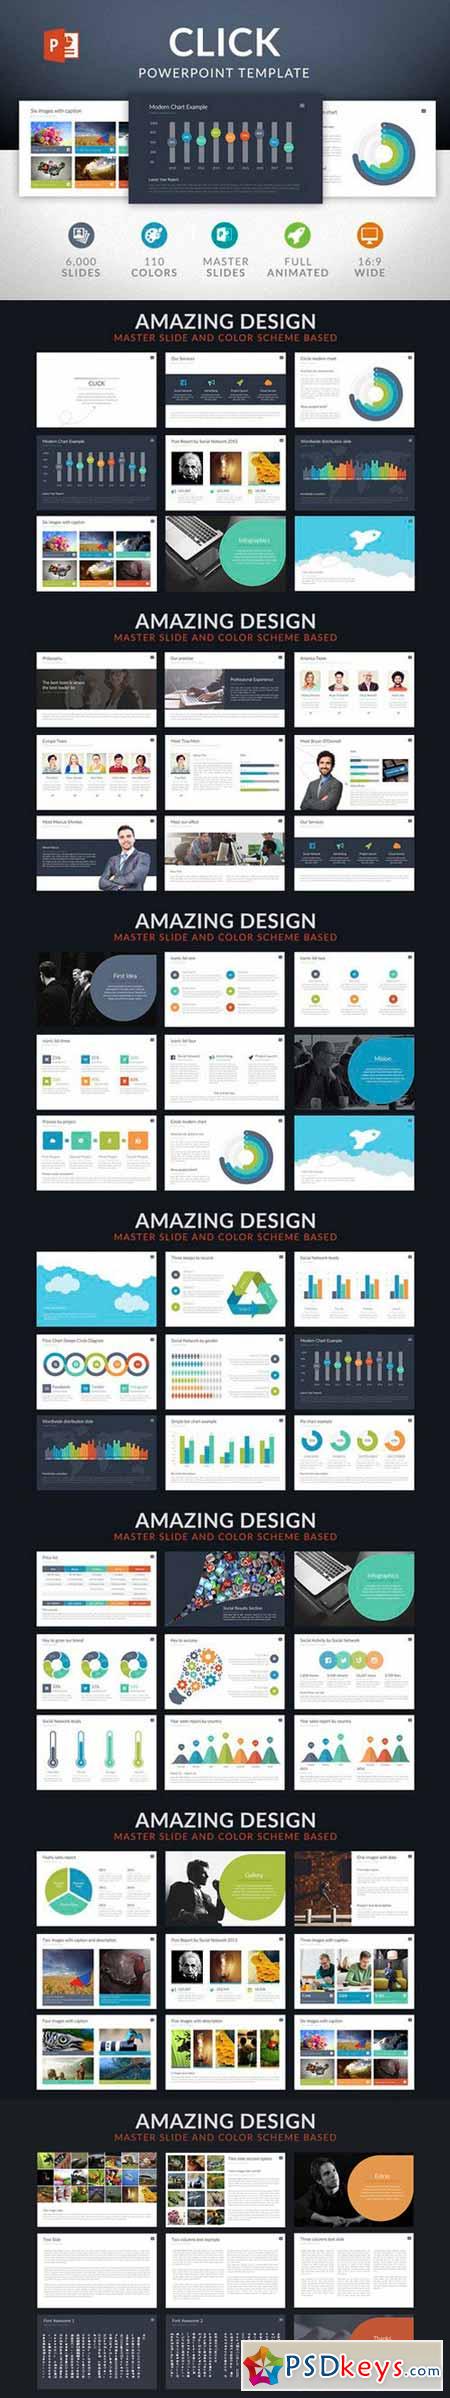 Click Powerpoint template 490388